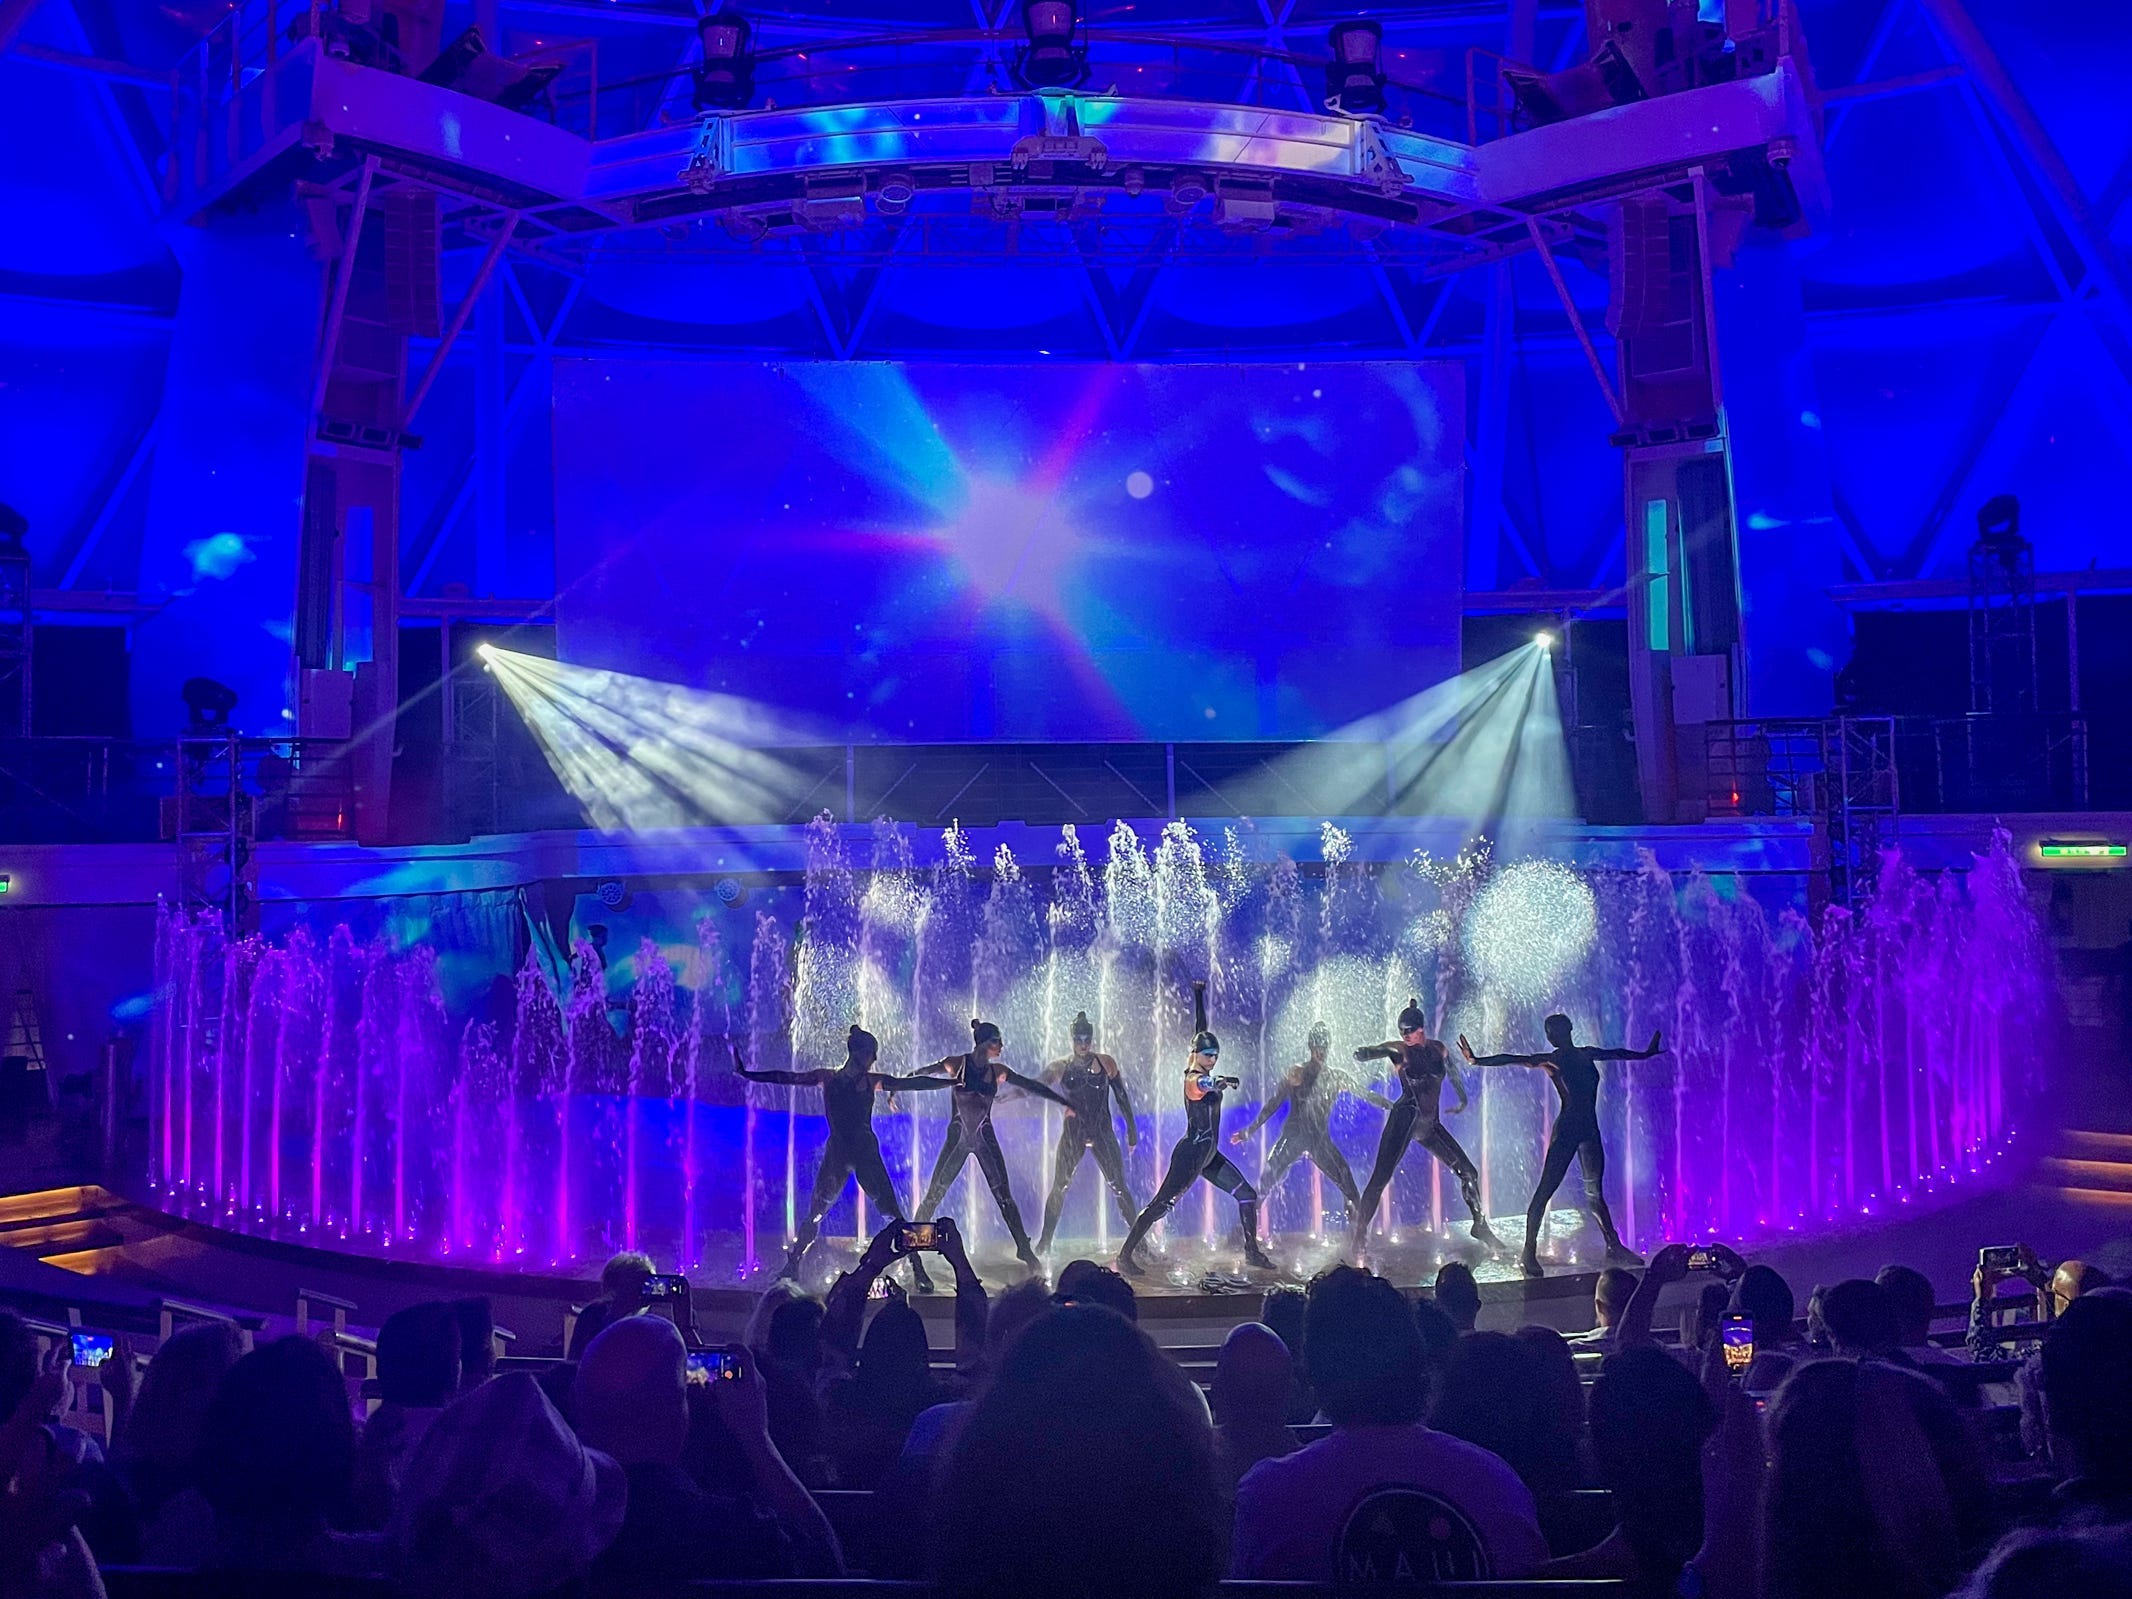 <p>During my two-night media sailing on Royal Caribbean's Wonder of the Seas, the nighttime comedy shows were almost completely booked by the time I boarded the ship.</p><p>The more proactive you are, the more likely you'll catch the shows you want to see.</p>